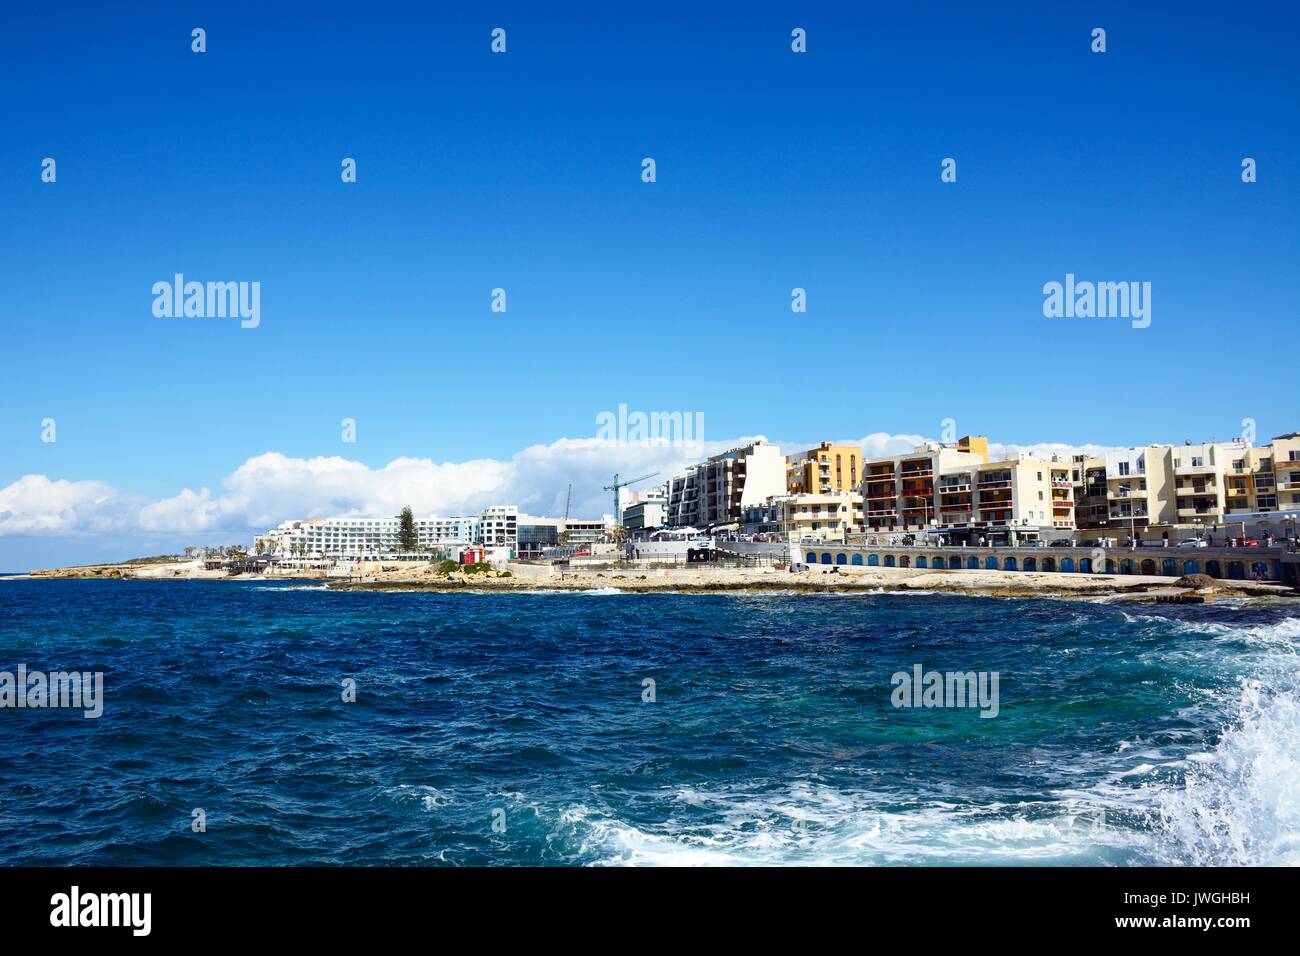 View of the rocky coastline with hotels and apartments to the rear, Bugibba, Malta, Europe. Stock Photo